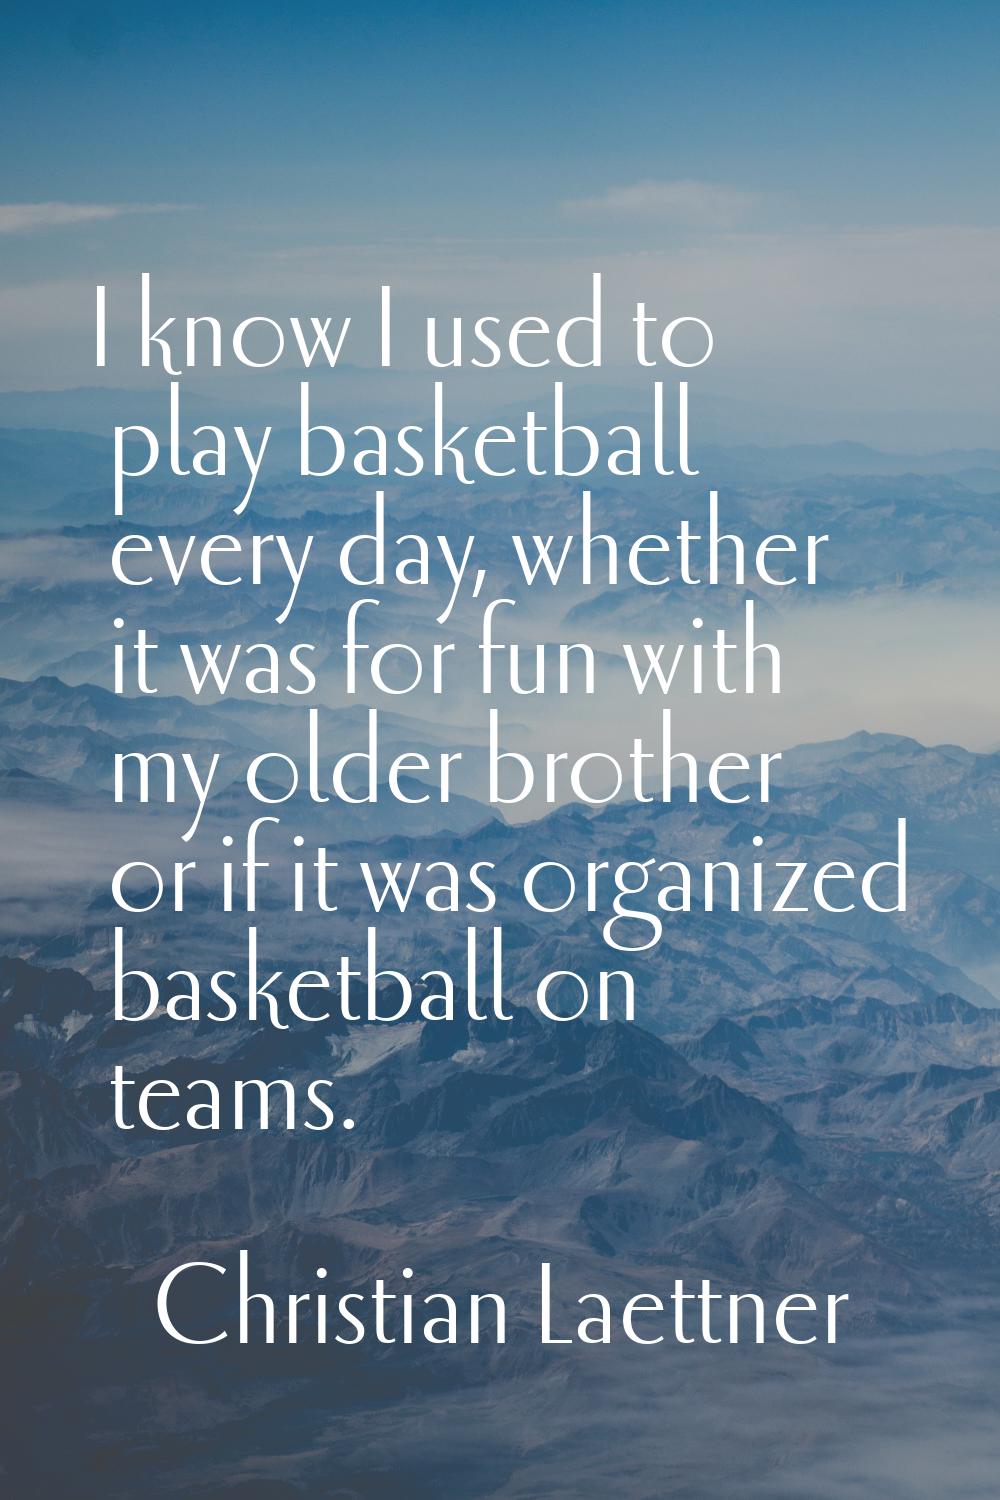 I know I used to play basketball every day, whether it was for fun with my older brother or if it w